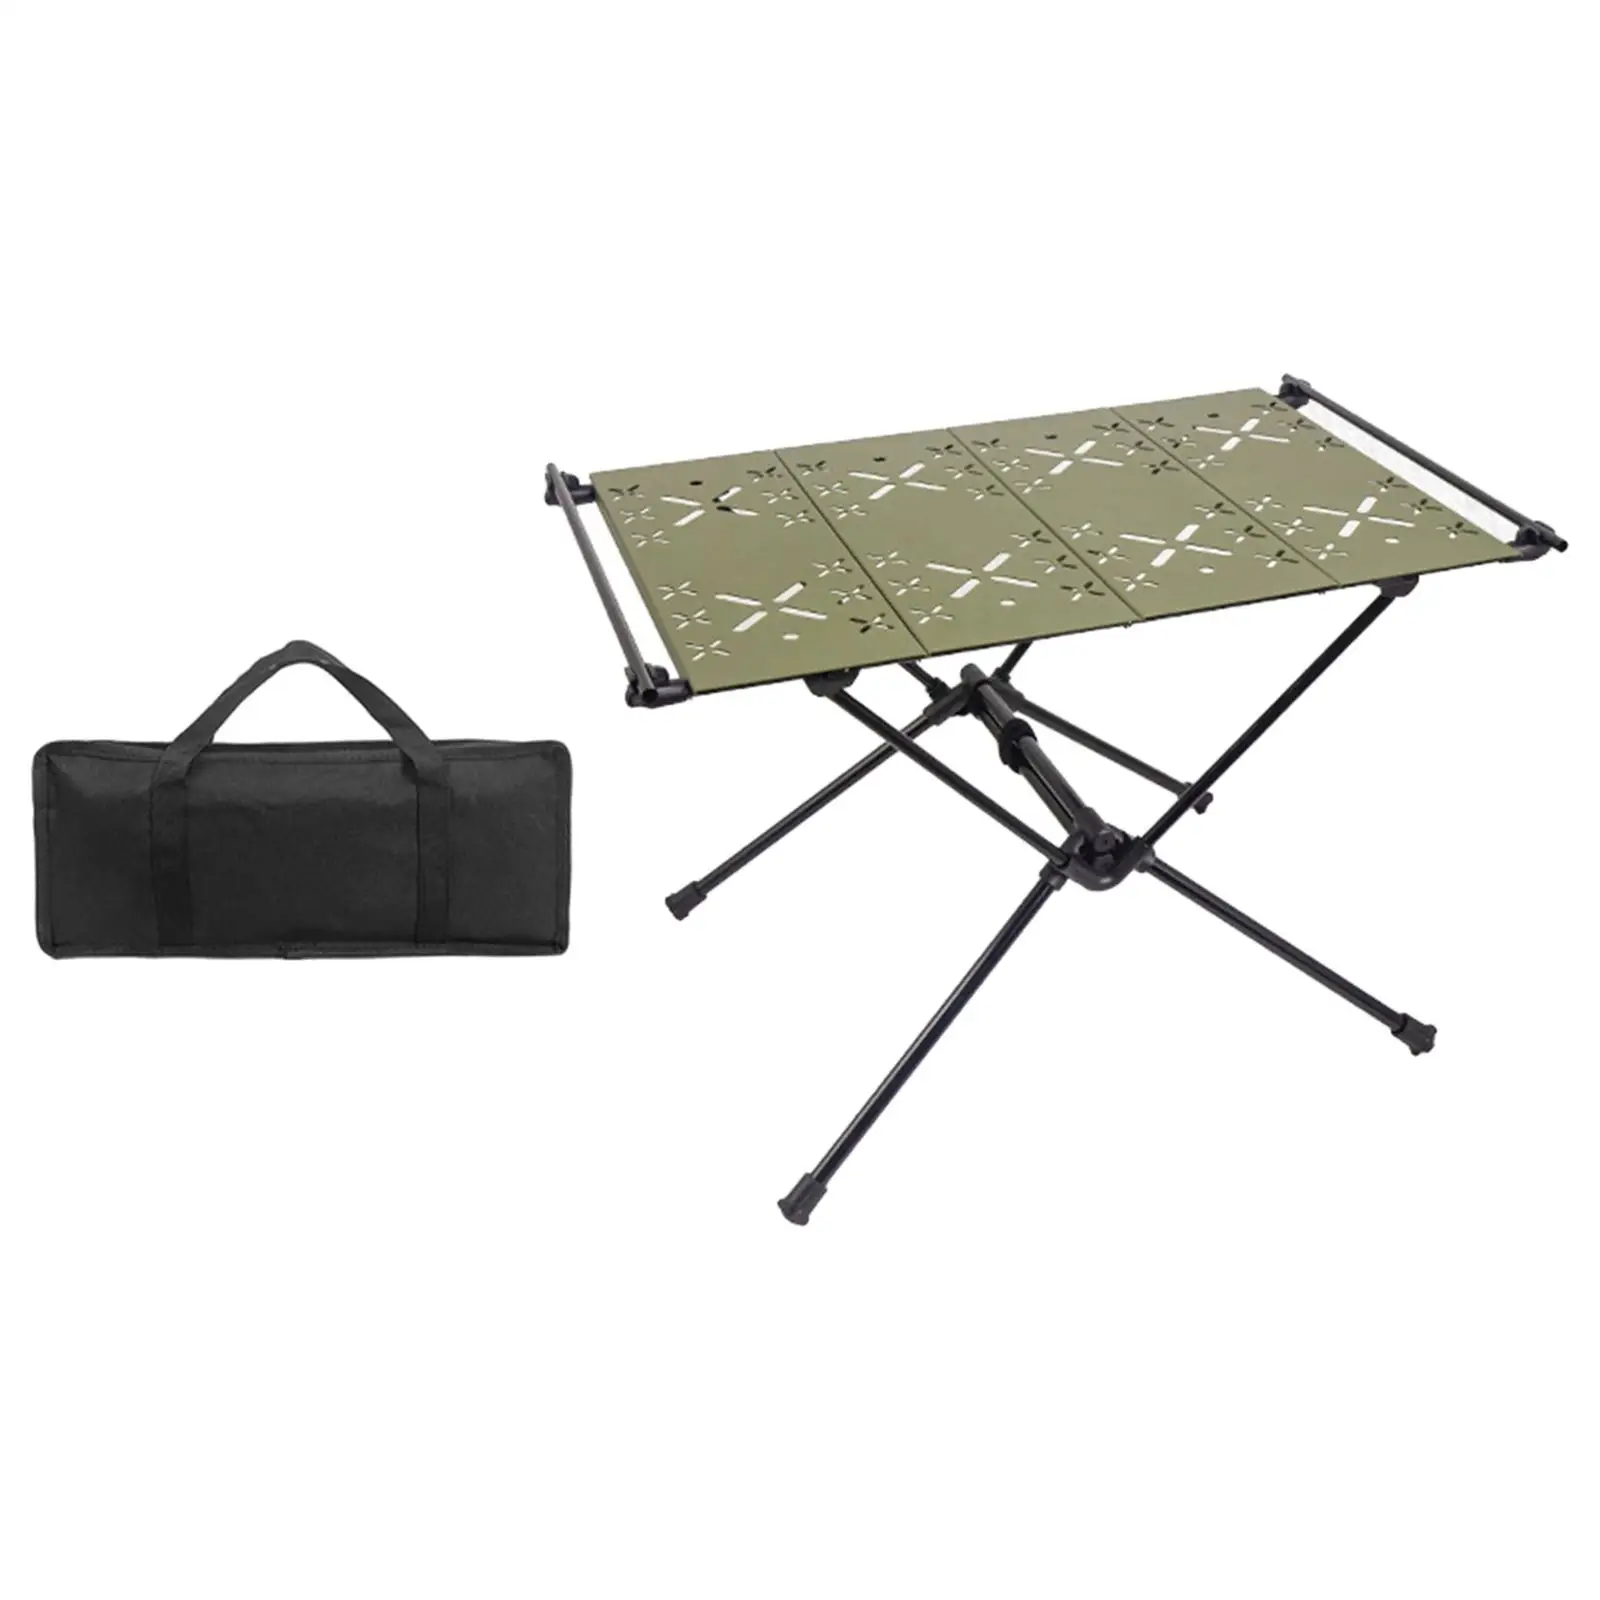 Folding Camping Table with Storage Bag Aluminum Alloy Lightweight Portable Desk for Picnic Backyard Fishing Hiking Backpacking